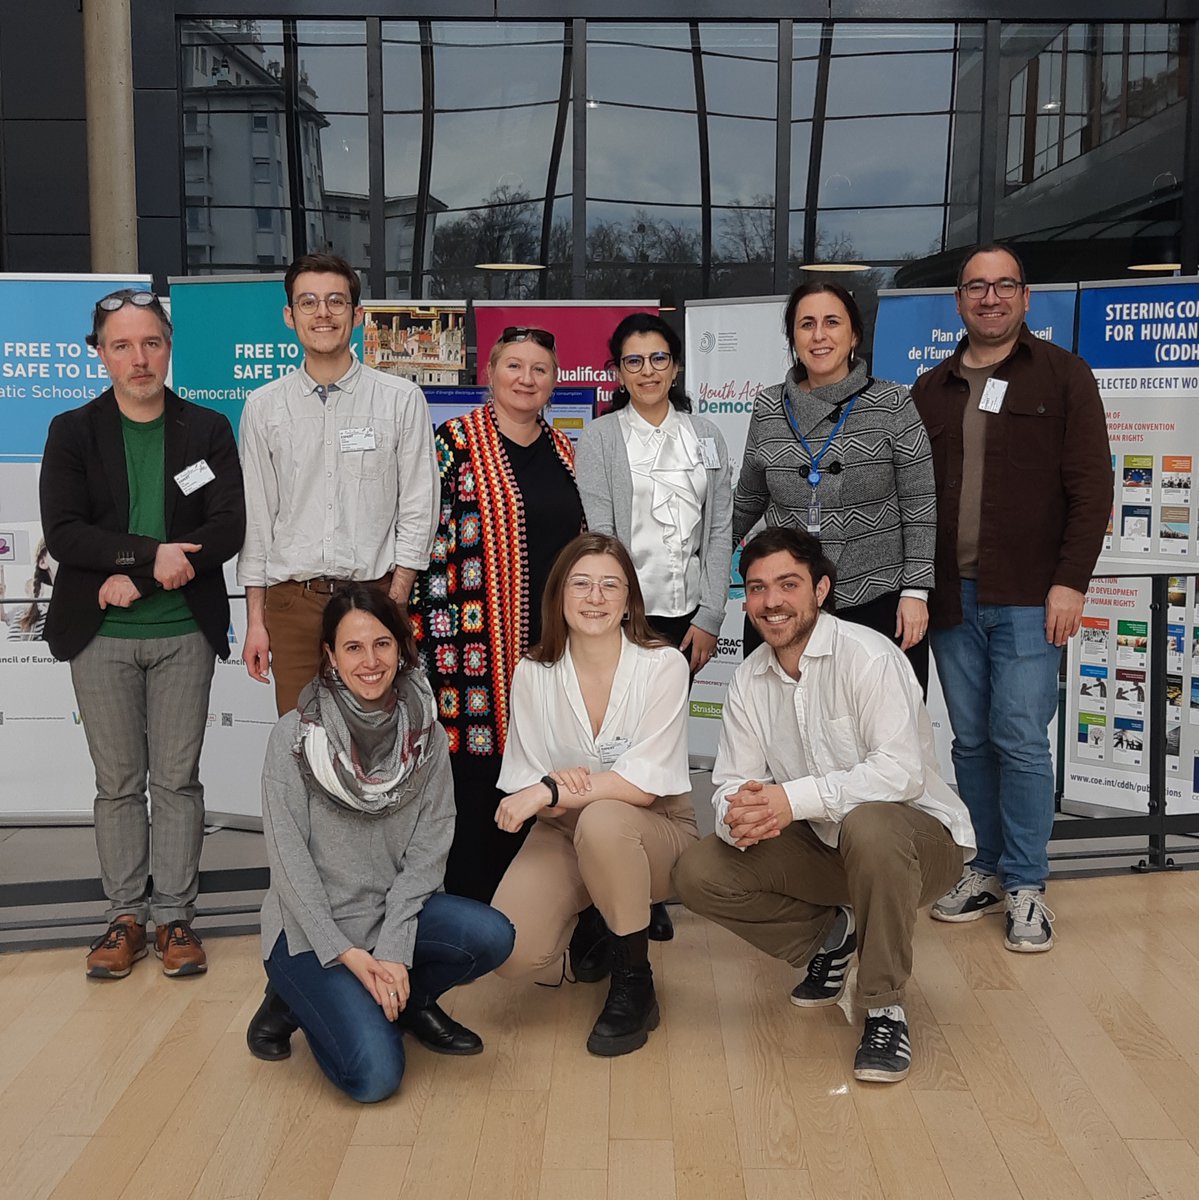 #ThinkRuralYouth! On 14-15 February, members from youth statutory bodies and scientific experts met in Strasbourg to draft a Committee of Ministers Recommendation on Rural Youth with the aim to promote youth engagement, economic opportunities & access human rights in rural areas.